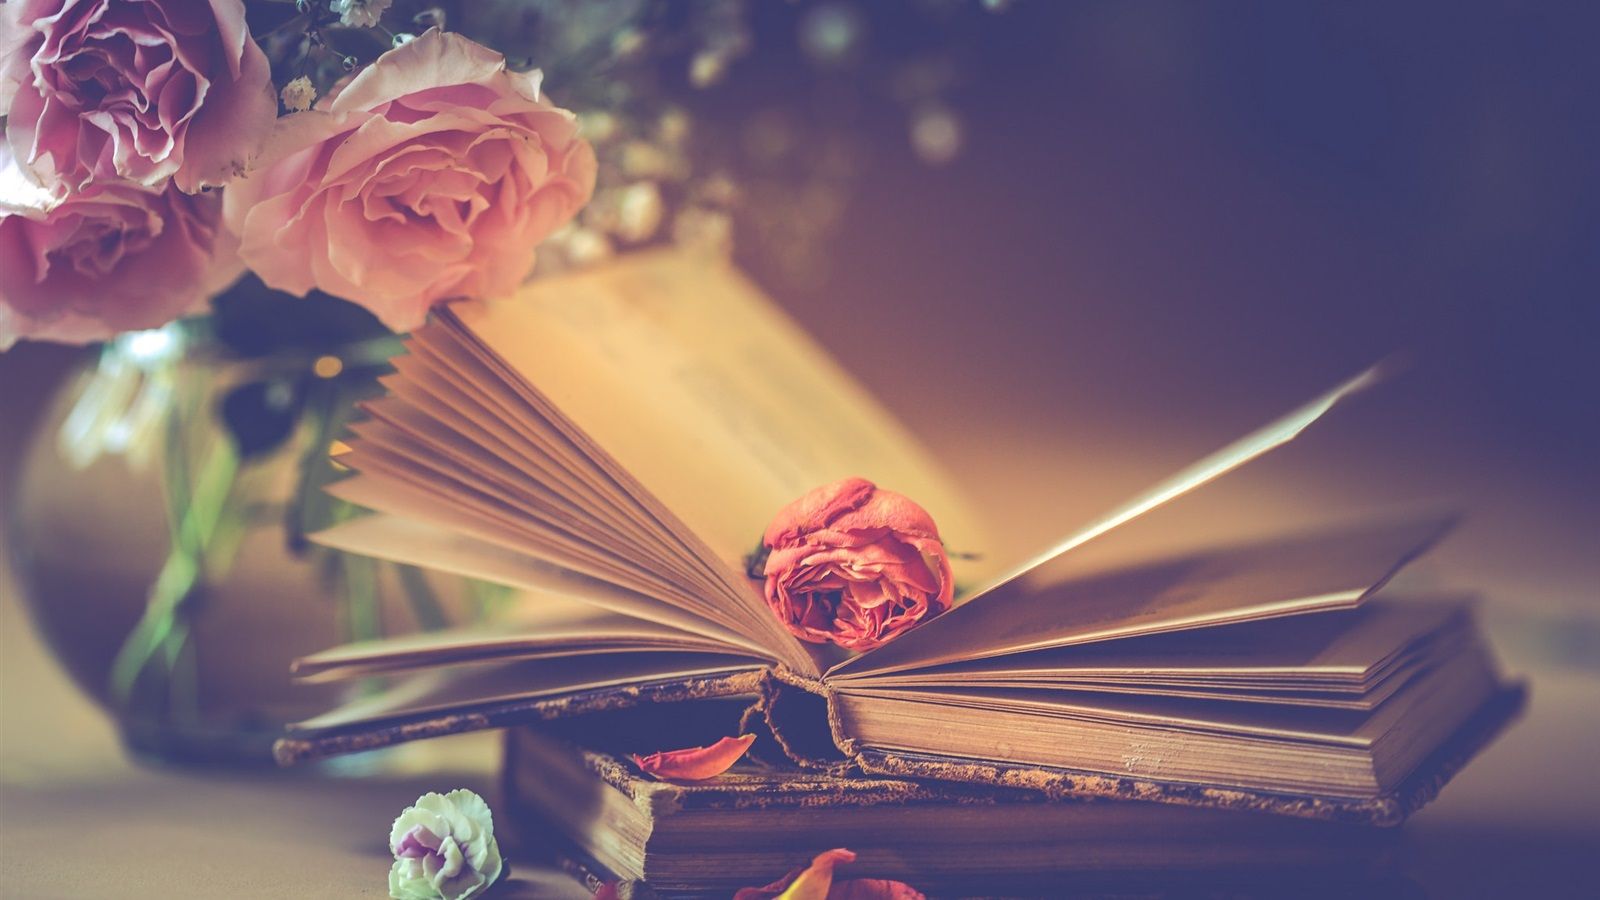 Wallpaper Pink roses and books, romantic 1920x1200 HD Picture, Image